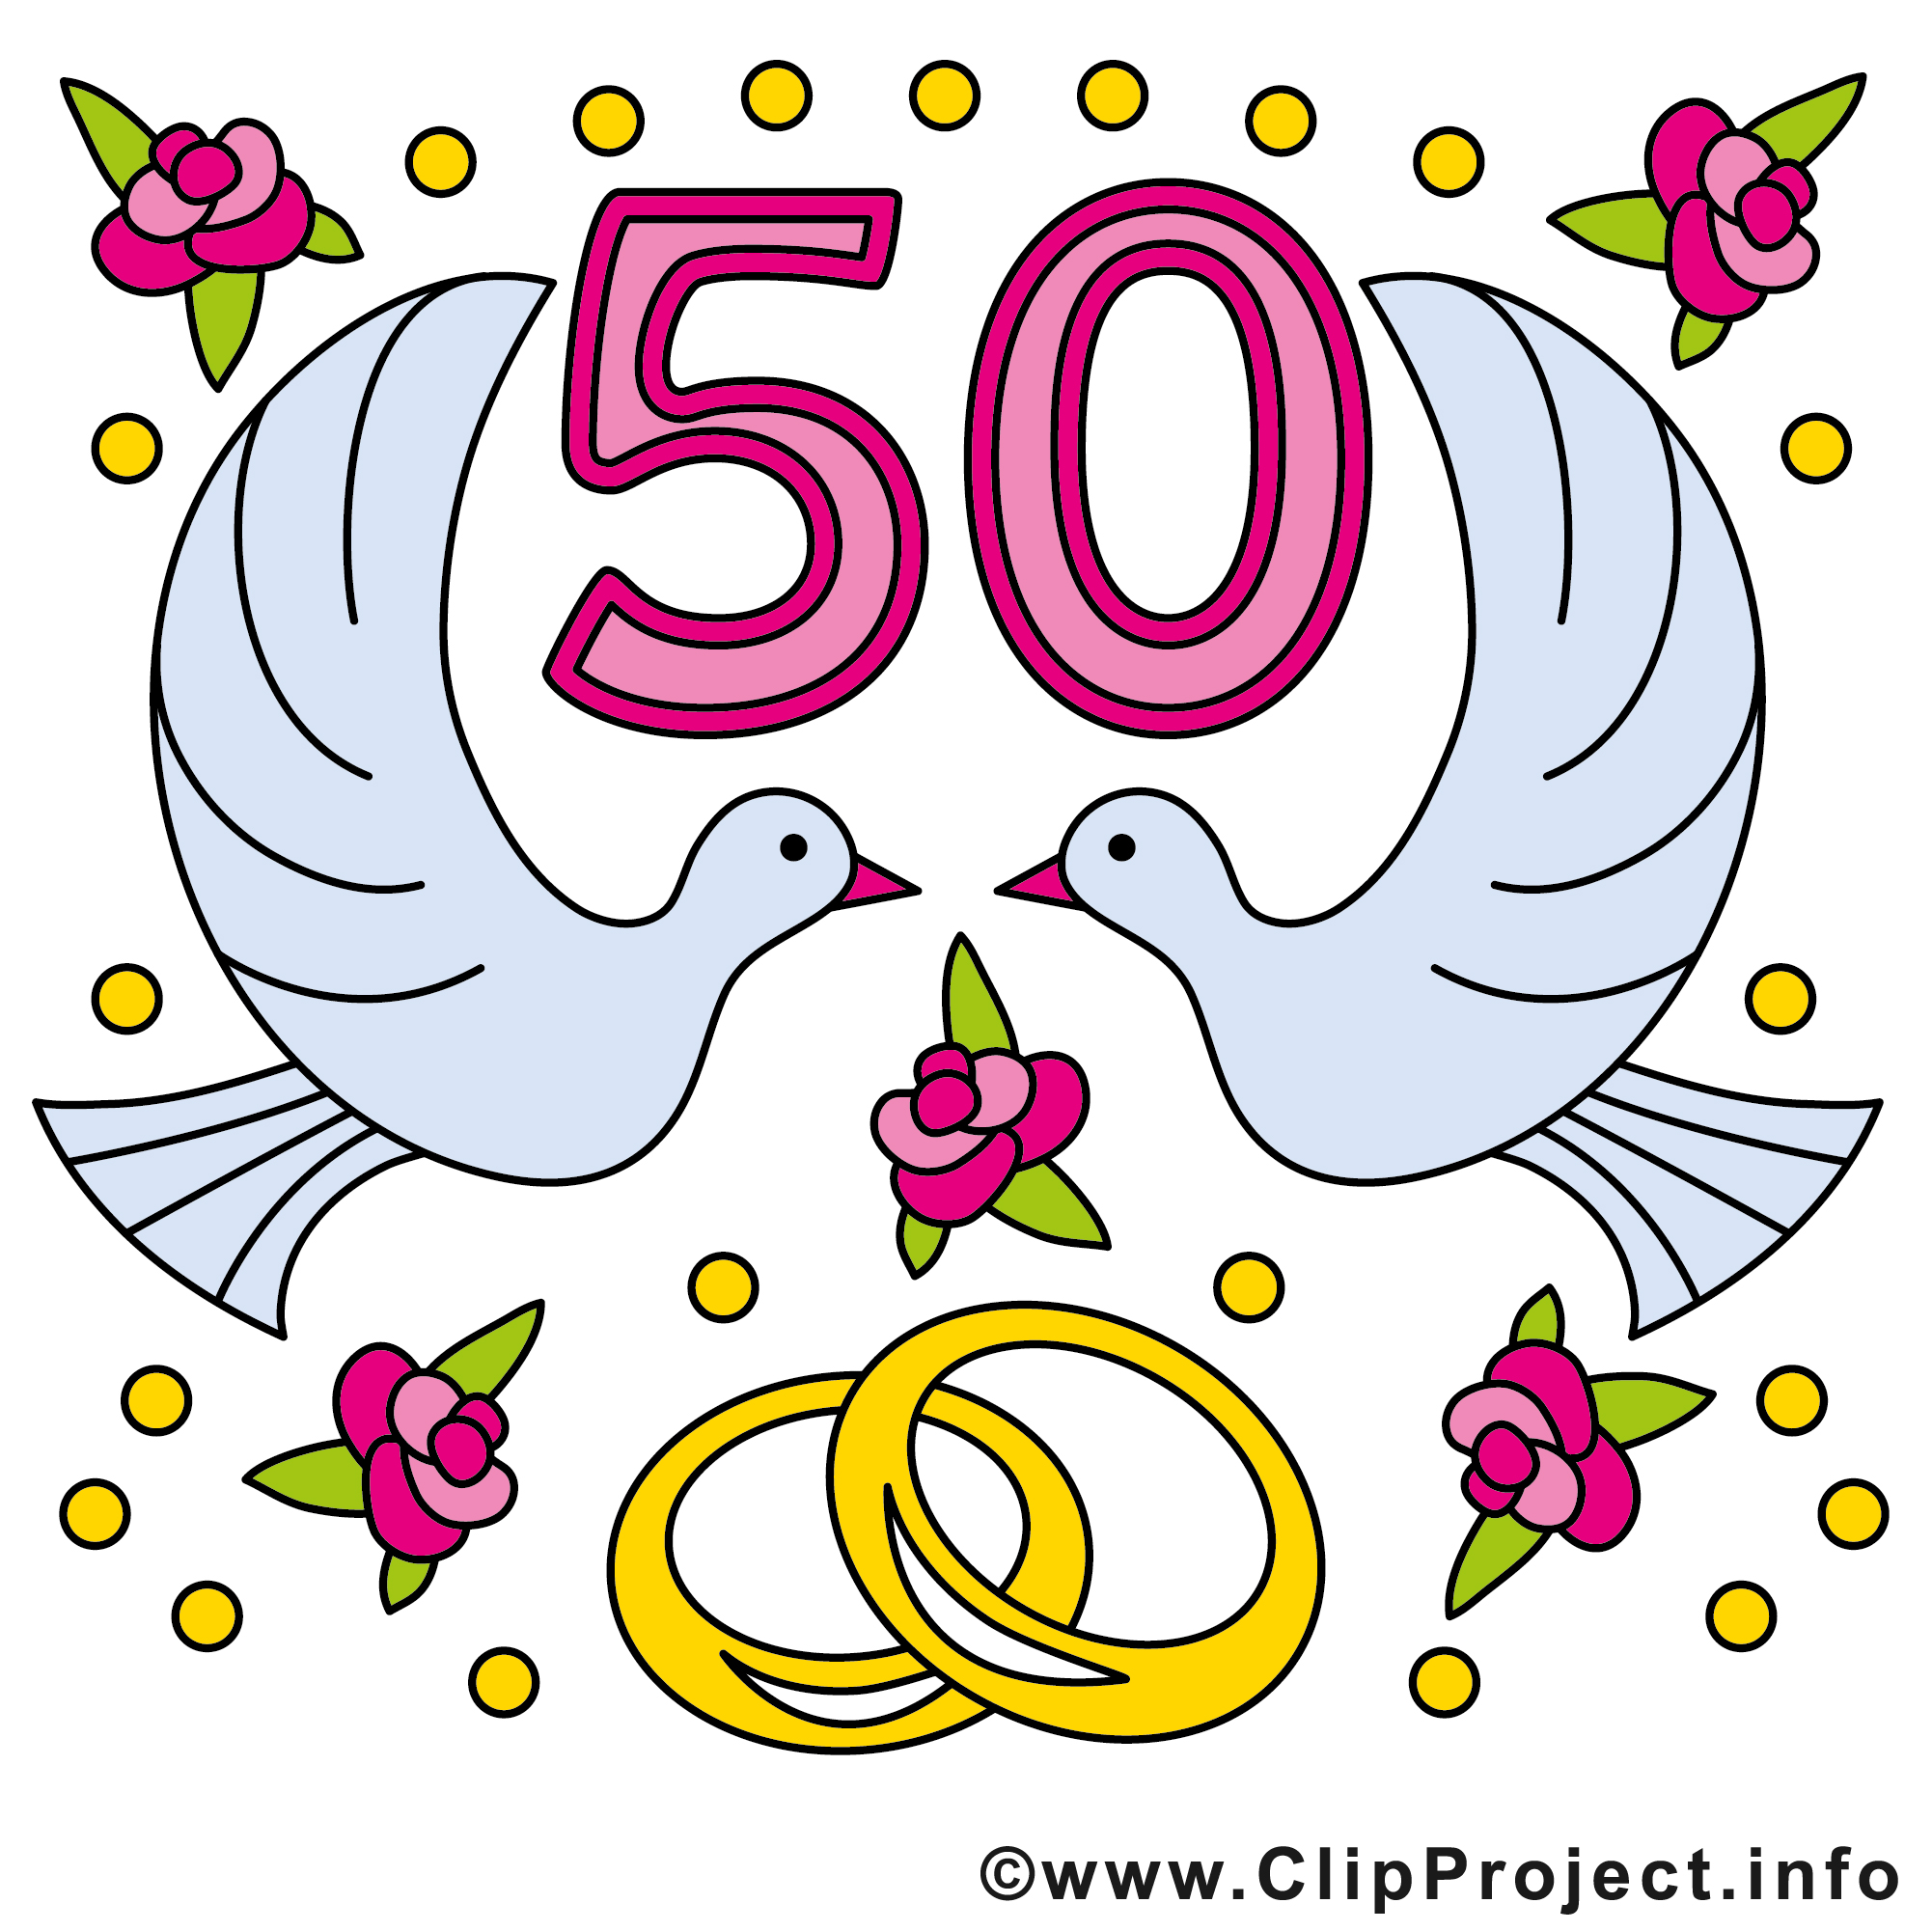 50 ans colombes anniversaire mariage images